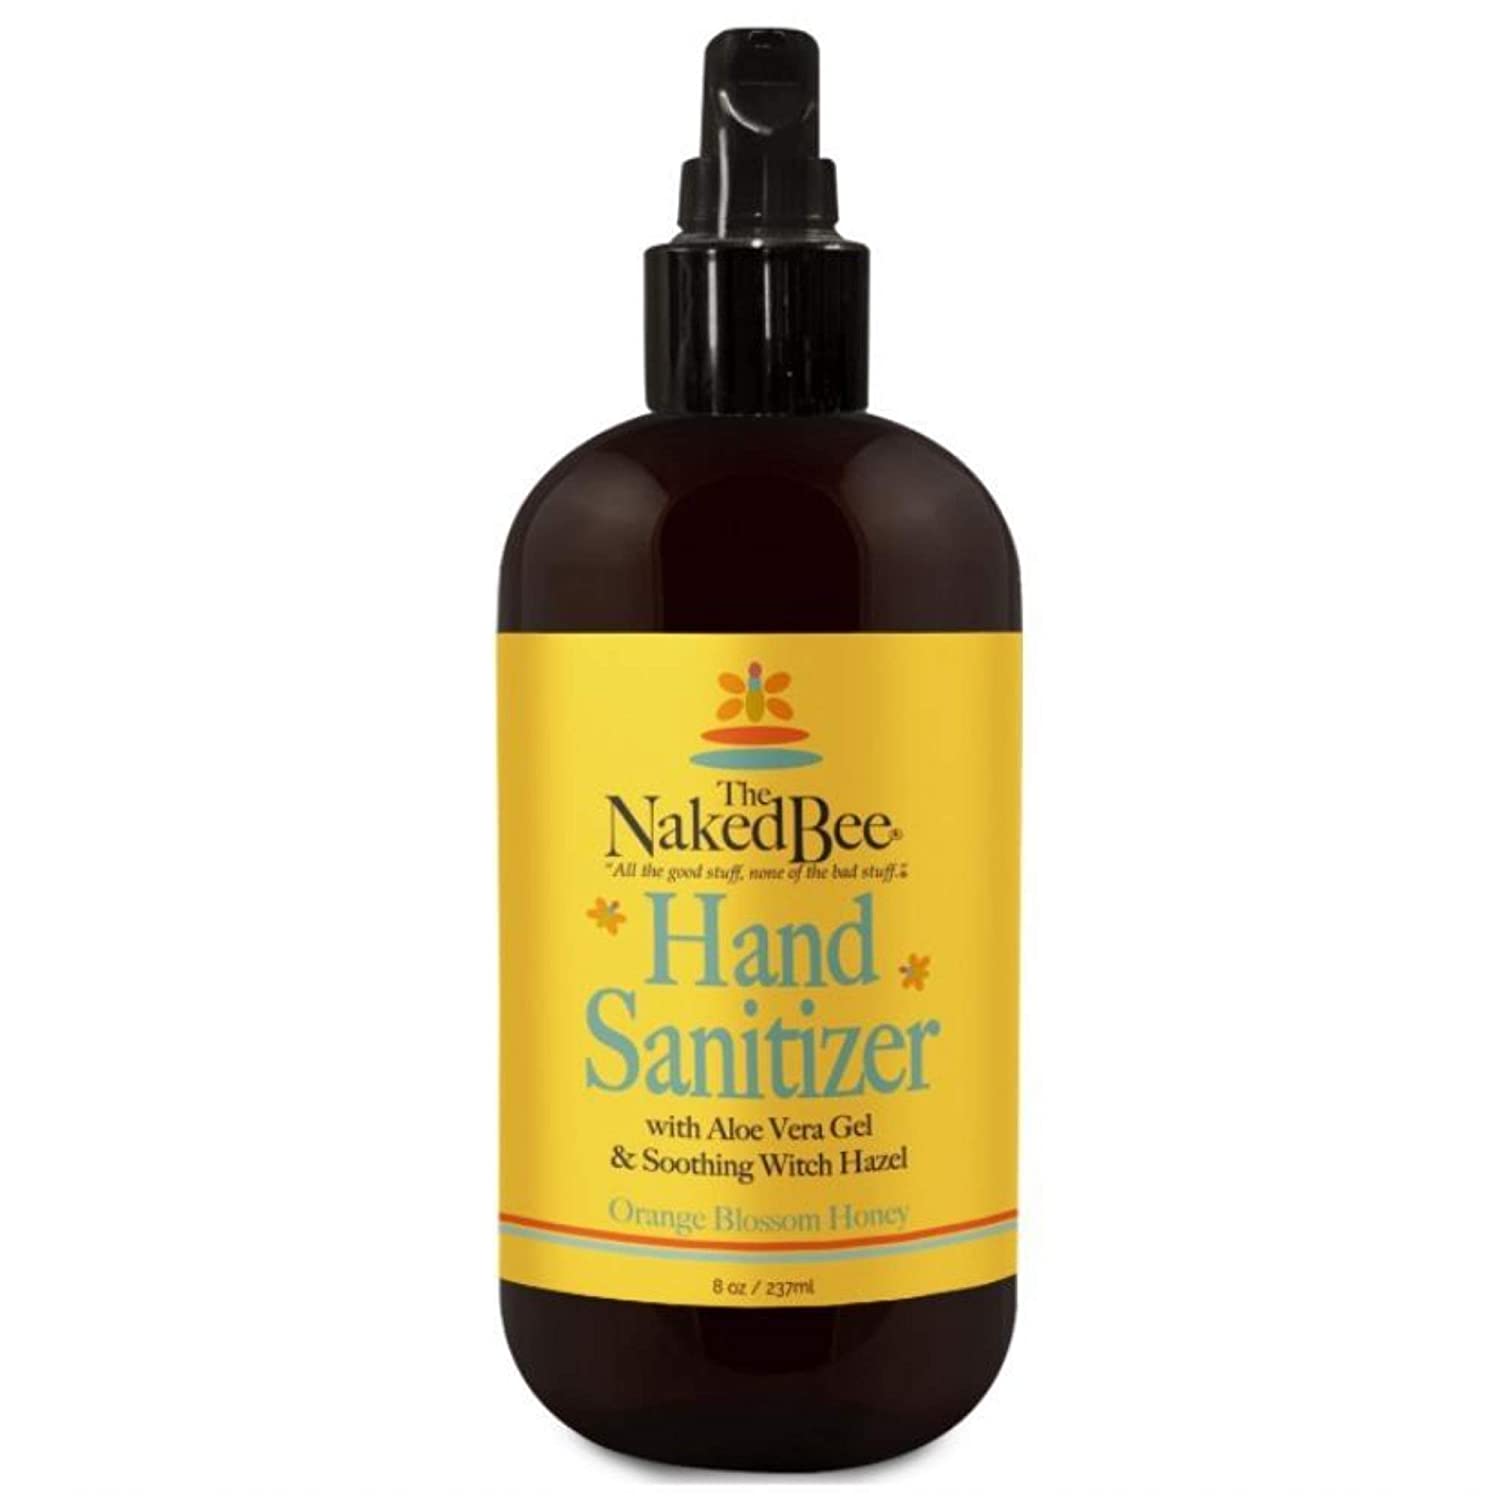 Naked Bee is a non-toxic hand sanitizer brand that smells like honey.